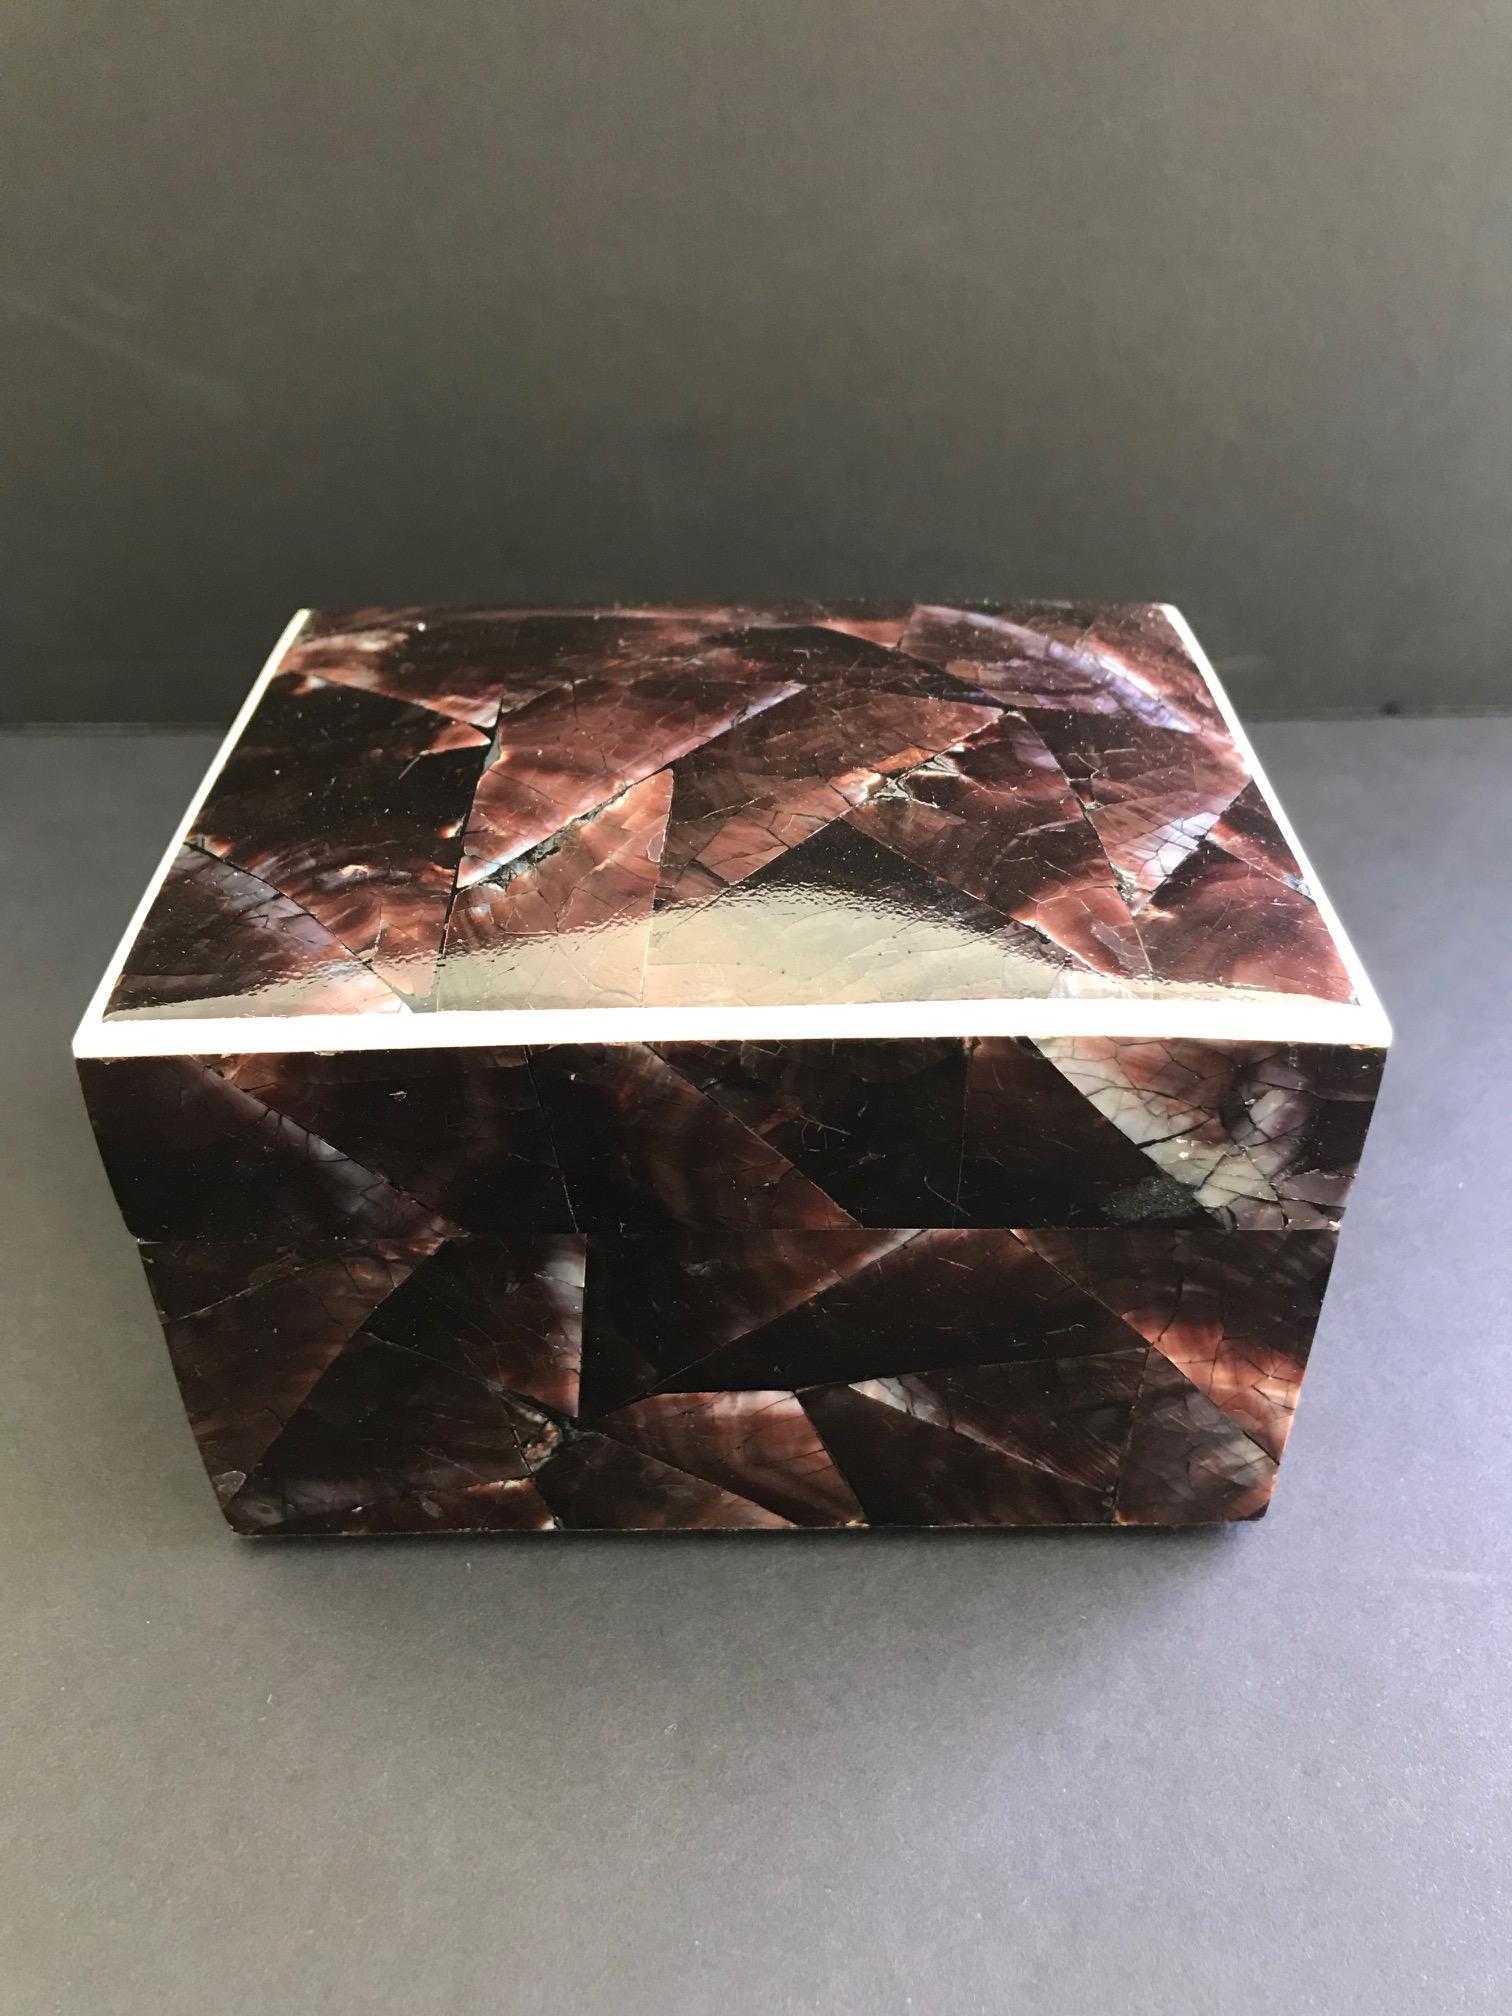 Organic modern decorative box or jewelry box comprised of natural pen shell. The luminous iridescent shells have a mosaic pattern in hues of brown and aubergine. Lid features a contrasting exotic bone trim and opens to reveal a palm wood interior.